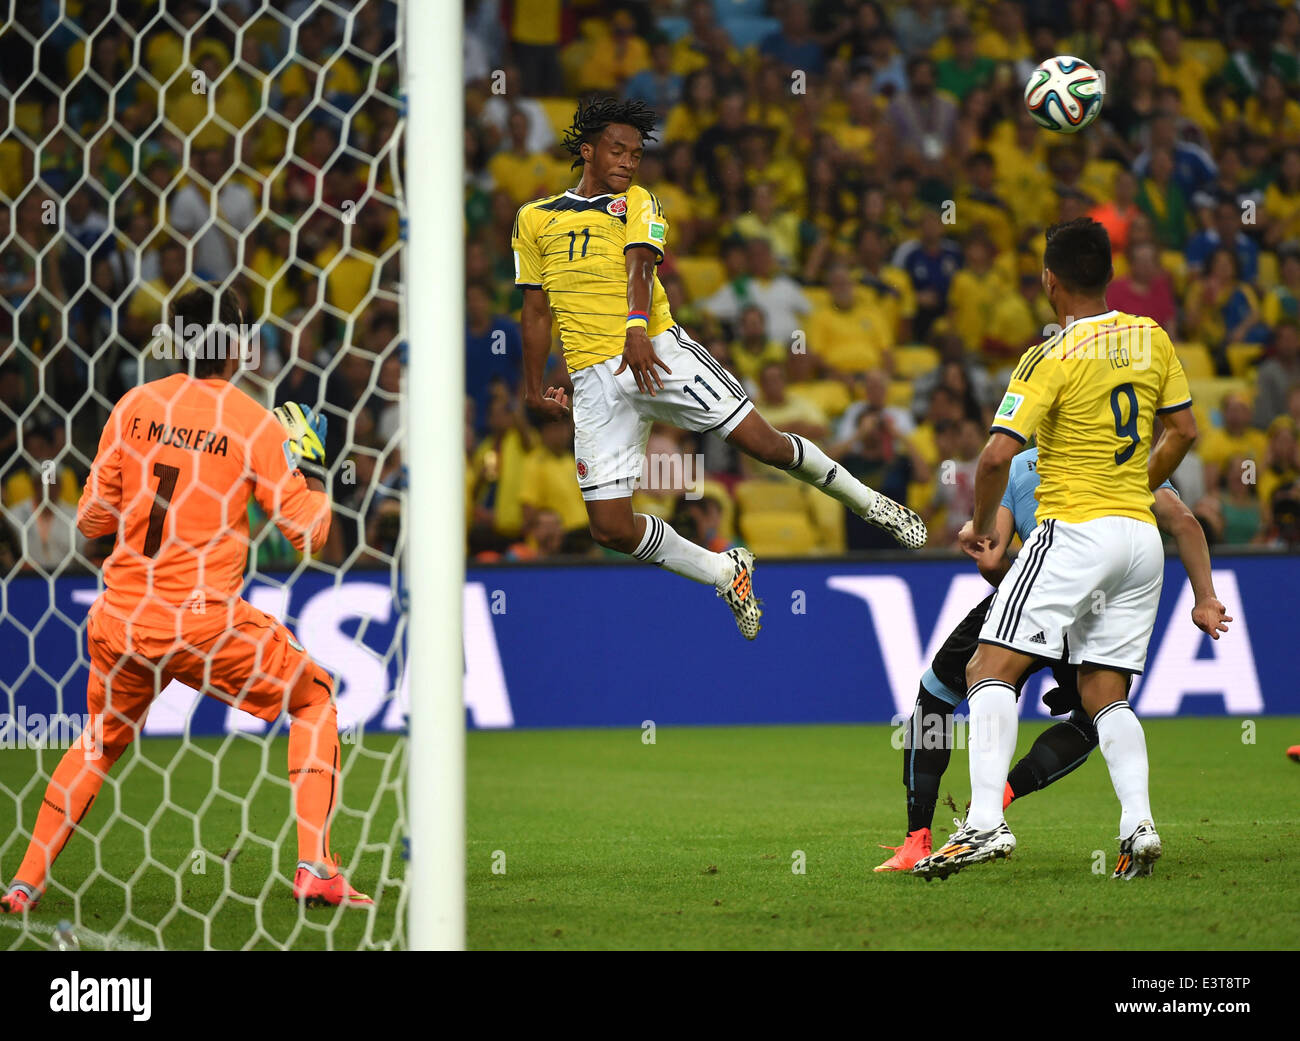 Rio De Janeiro, Brazil. 28th June, 2014. Colombia's Juan Guillermo Cuadrado (2nd L) jumps for the ball during a Round of 16 match between Colombia and Uruguay of 2014 FIFA World Cup at the Estadio do Maracana Stadium in Rio de Janeiro, Brazil, on June 28, 2014. Colombia won 2-0 over Uruguay on Saturday. Credit:  Wang Yuguo/Xinhua/Alamy Live News Stock Photo